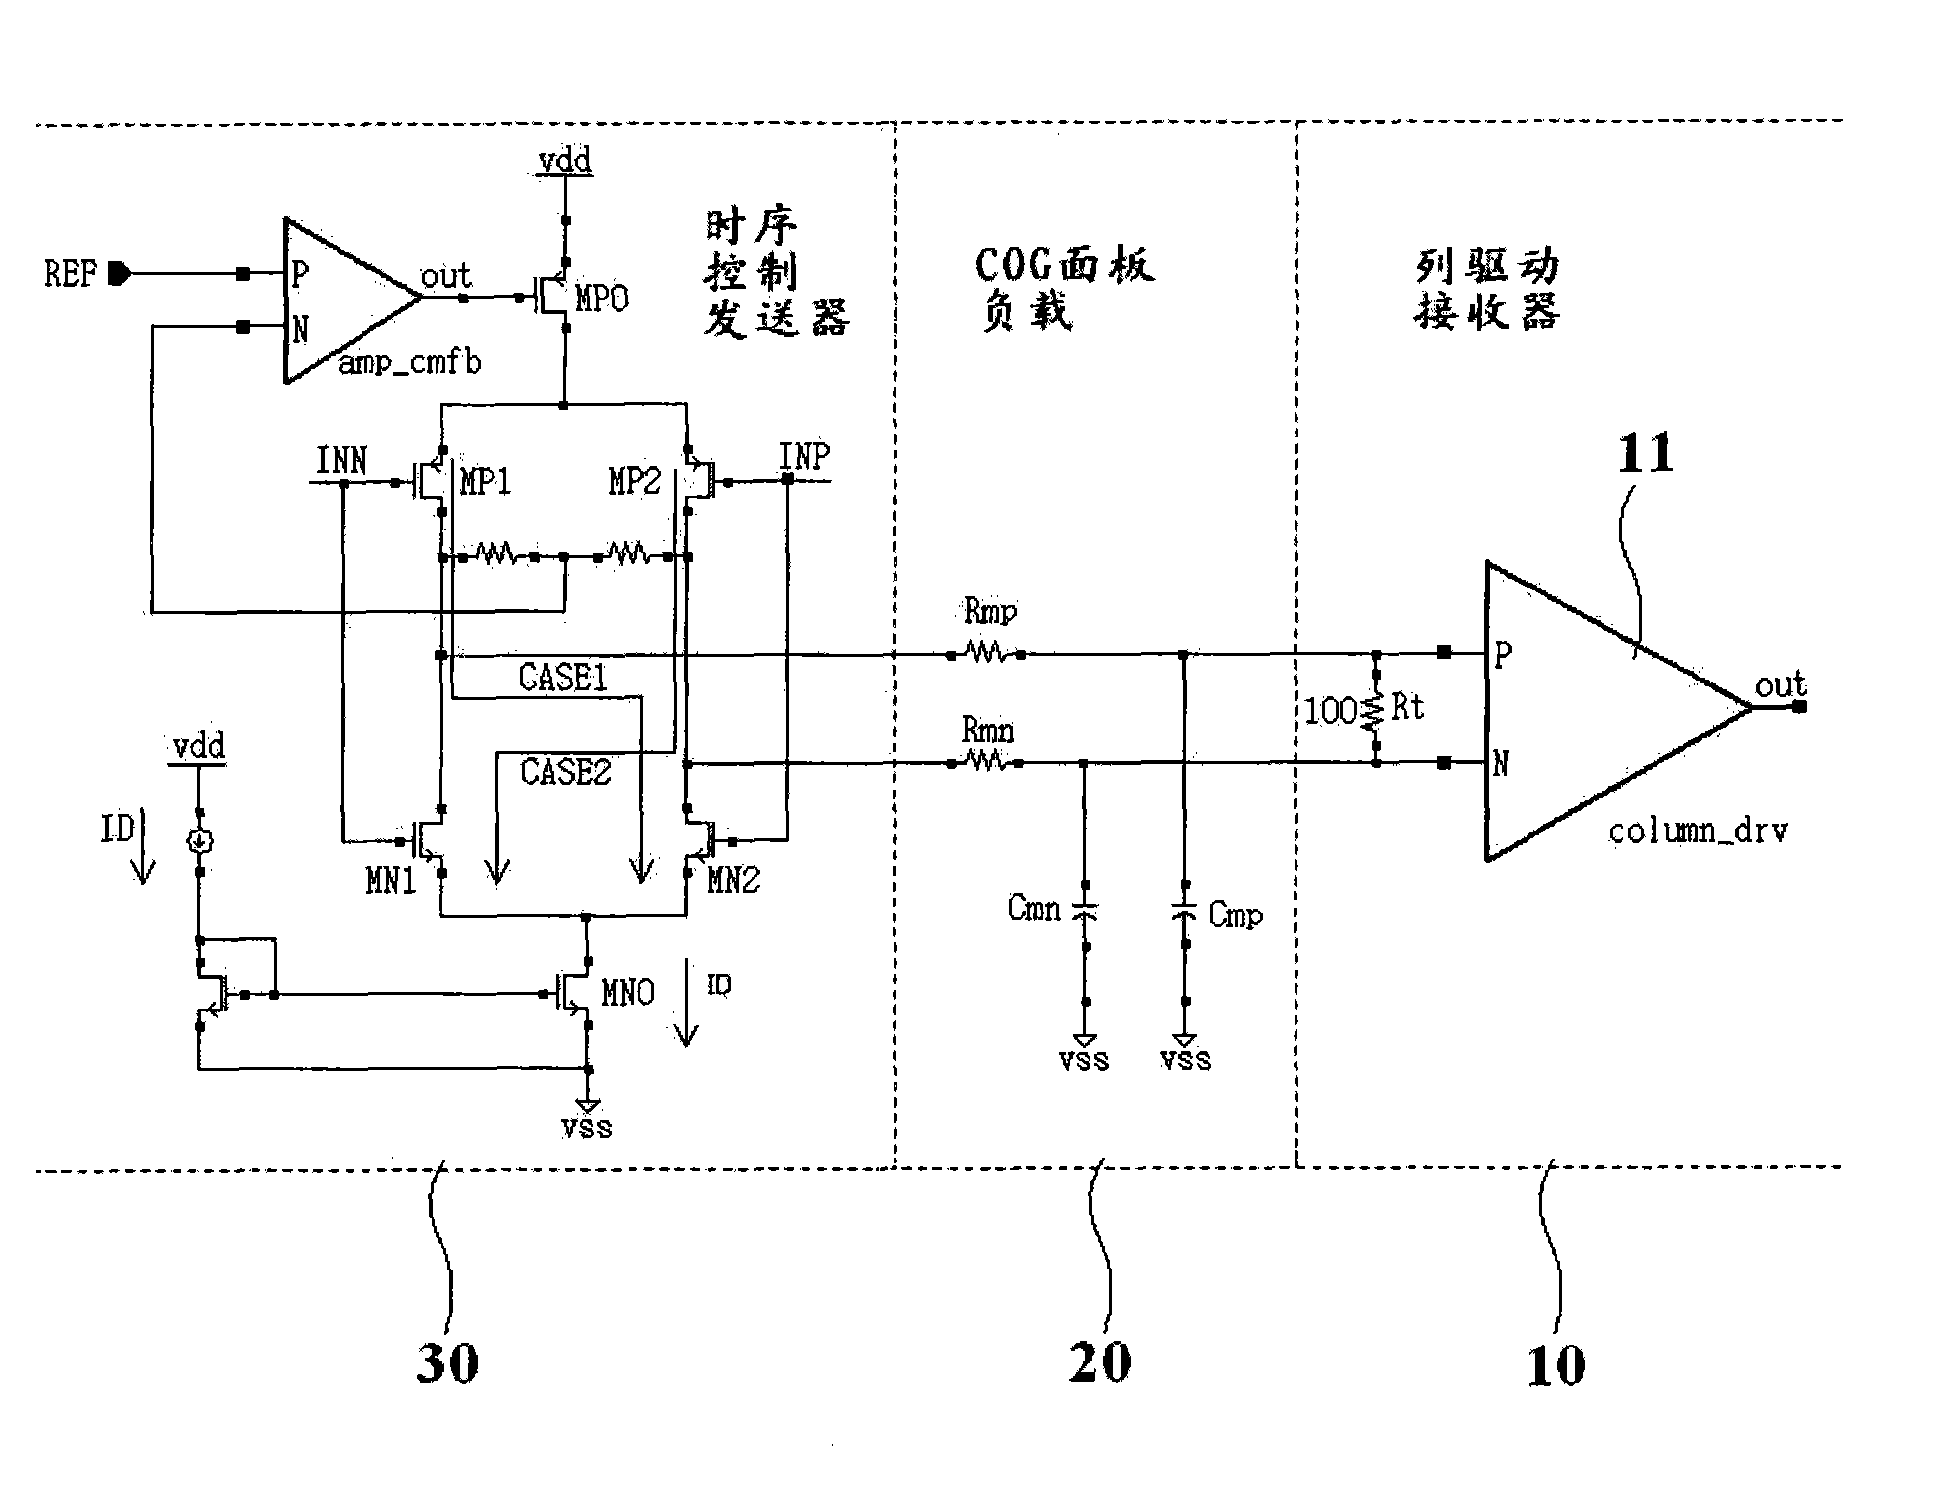 Differential signaling serial interface circuit